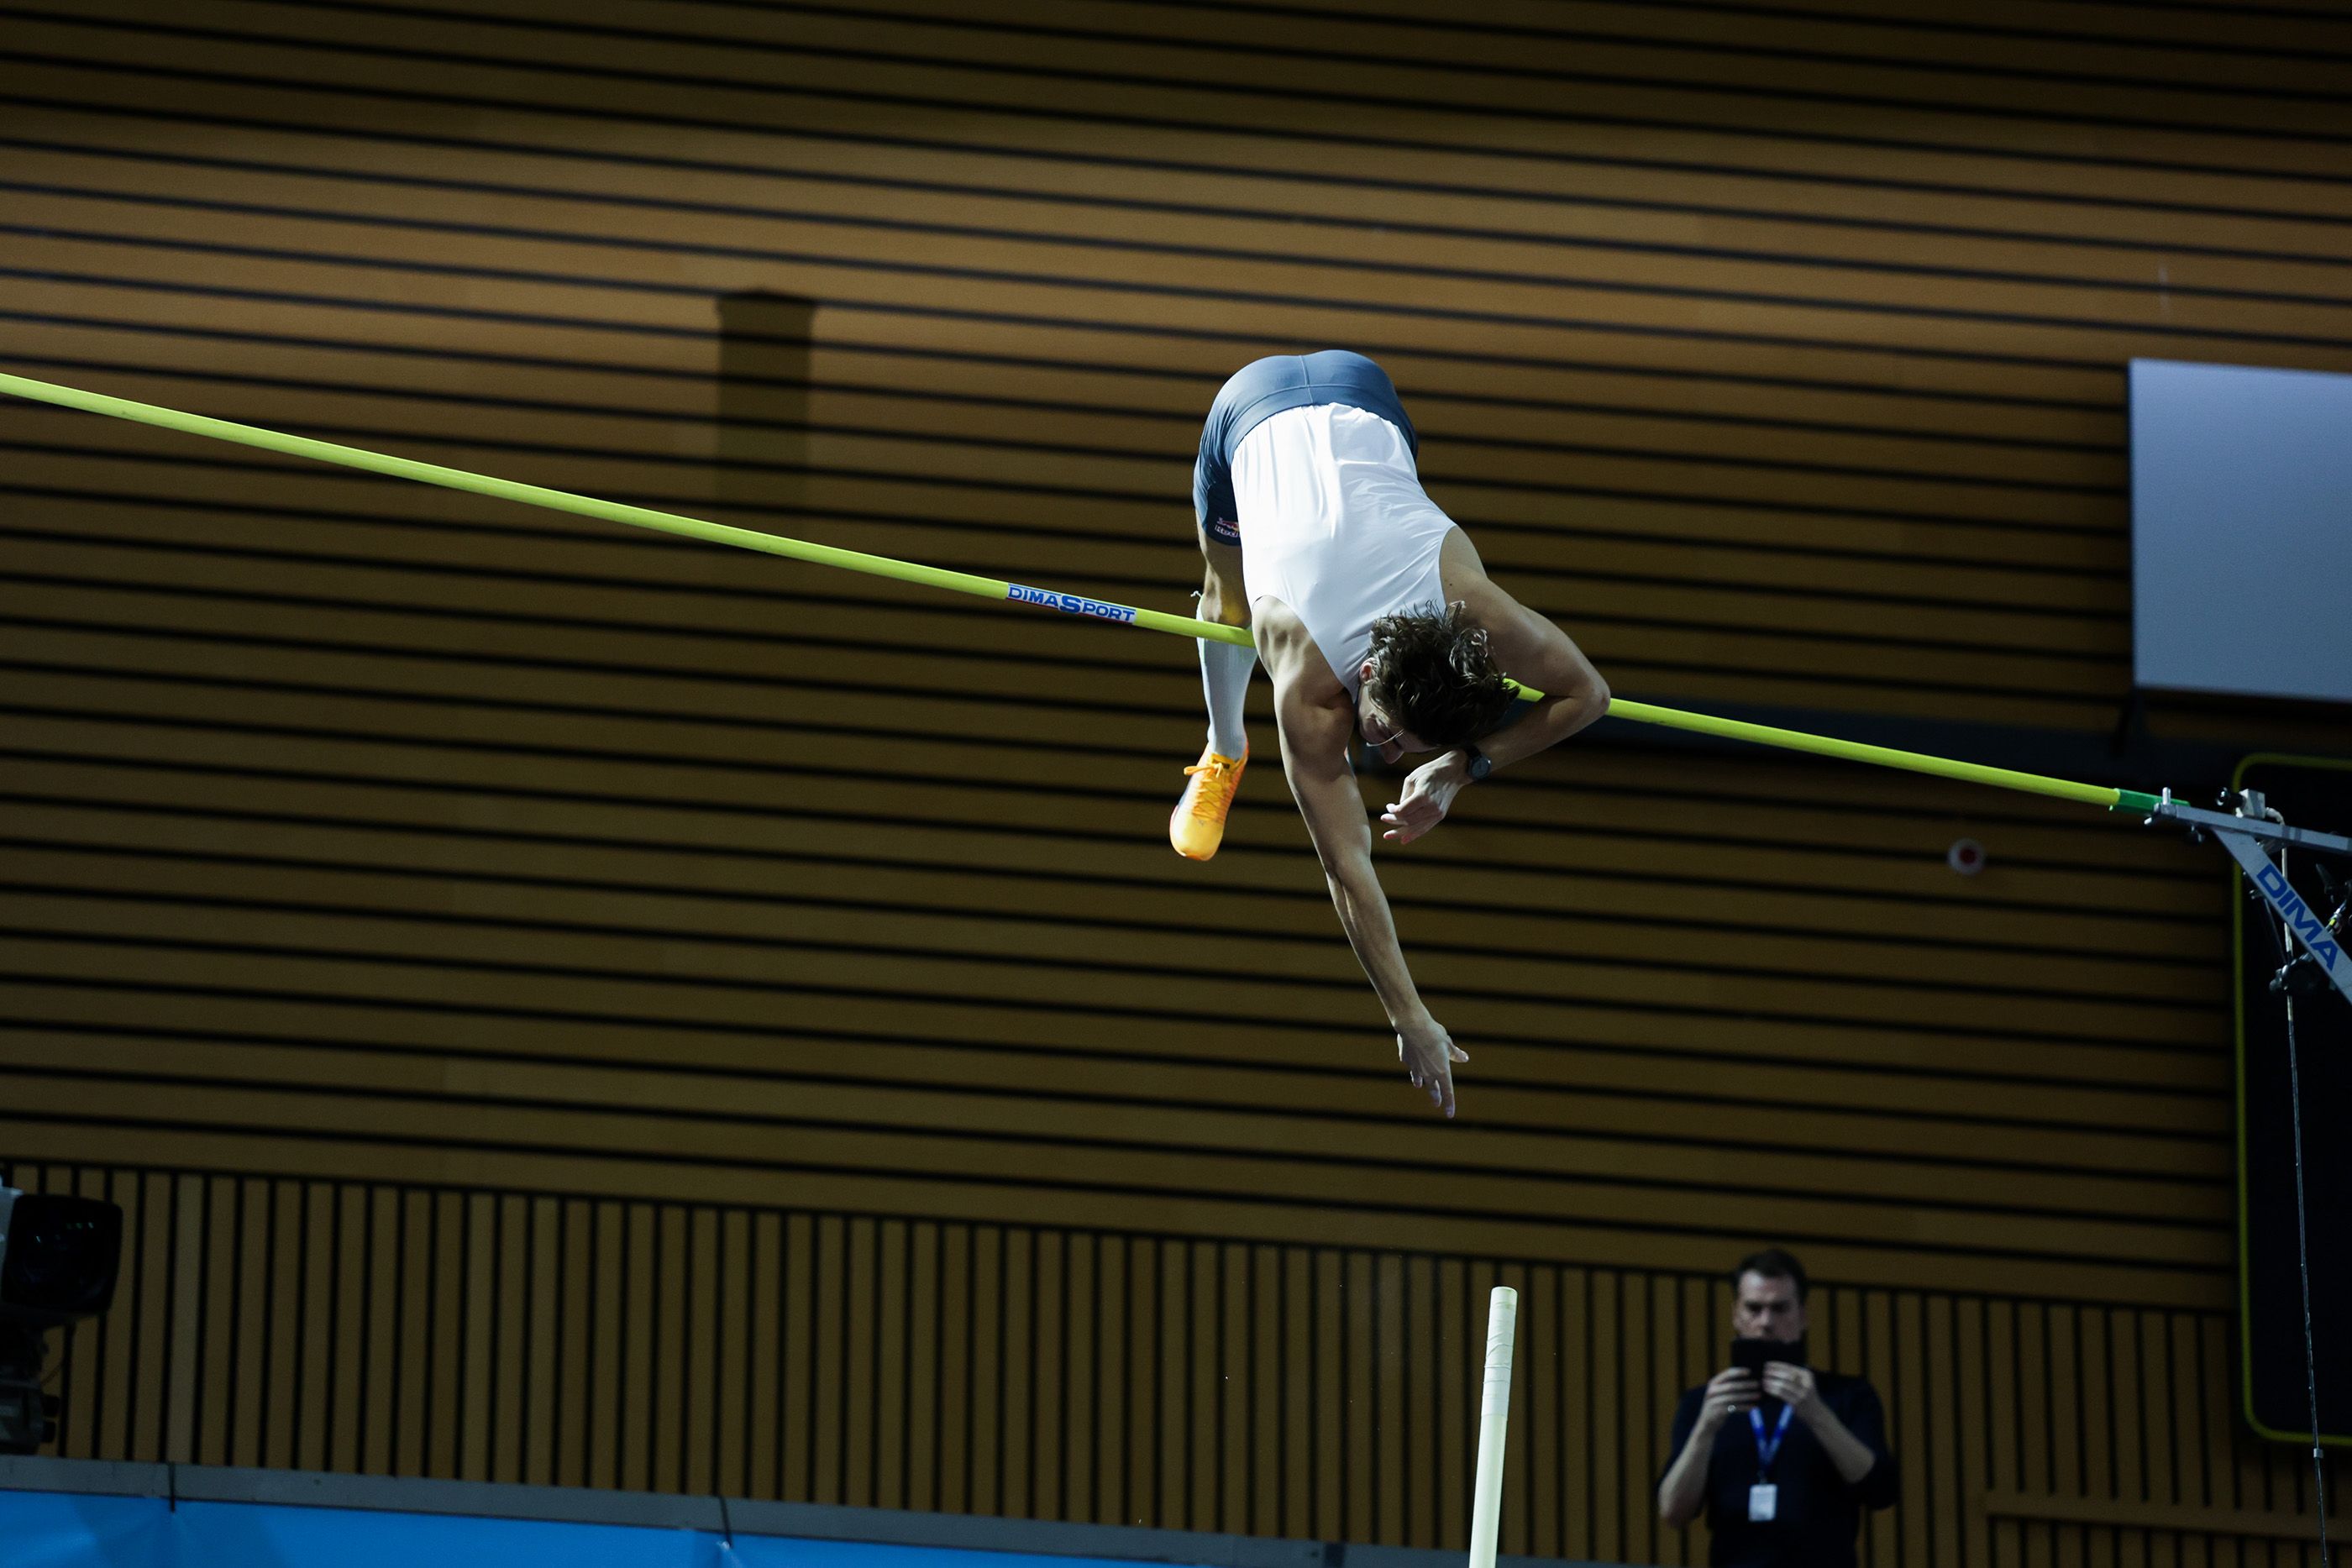 Mondo Duplantis sets a world pole vault record of 6.22m in Clermont-Ferrand